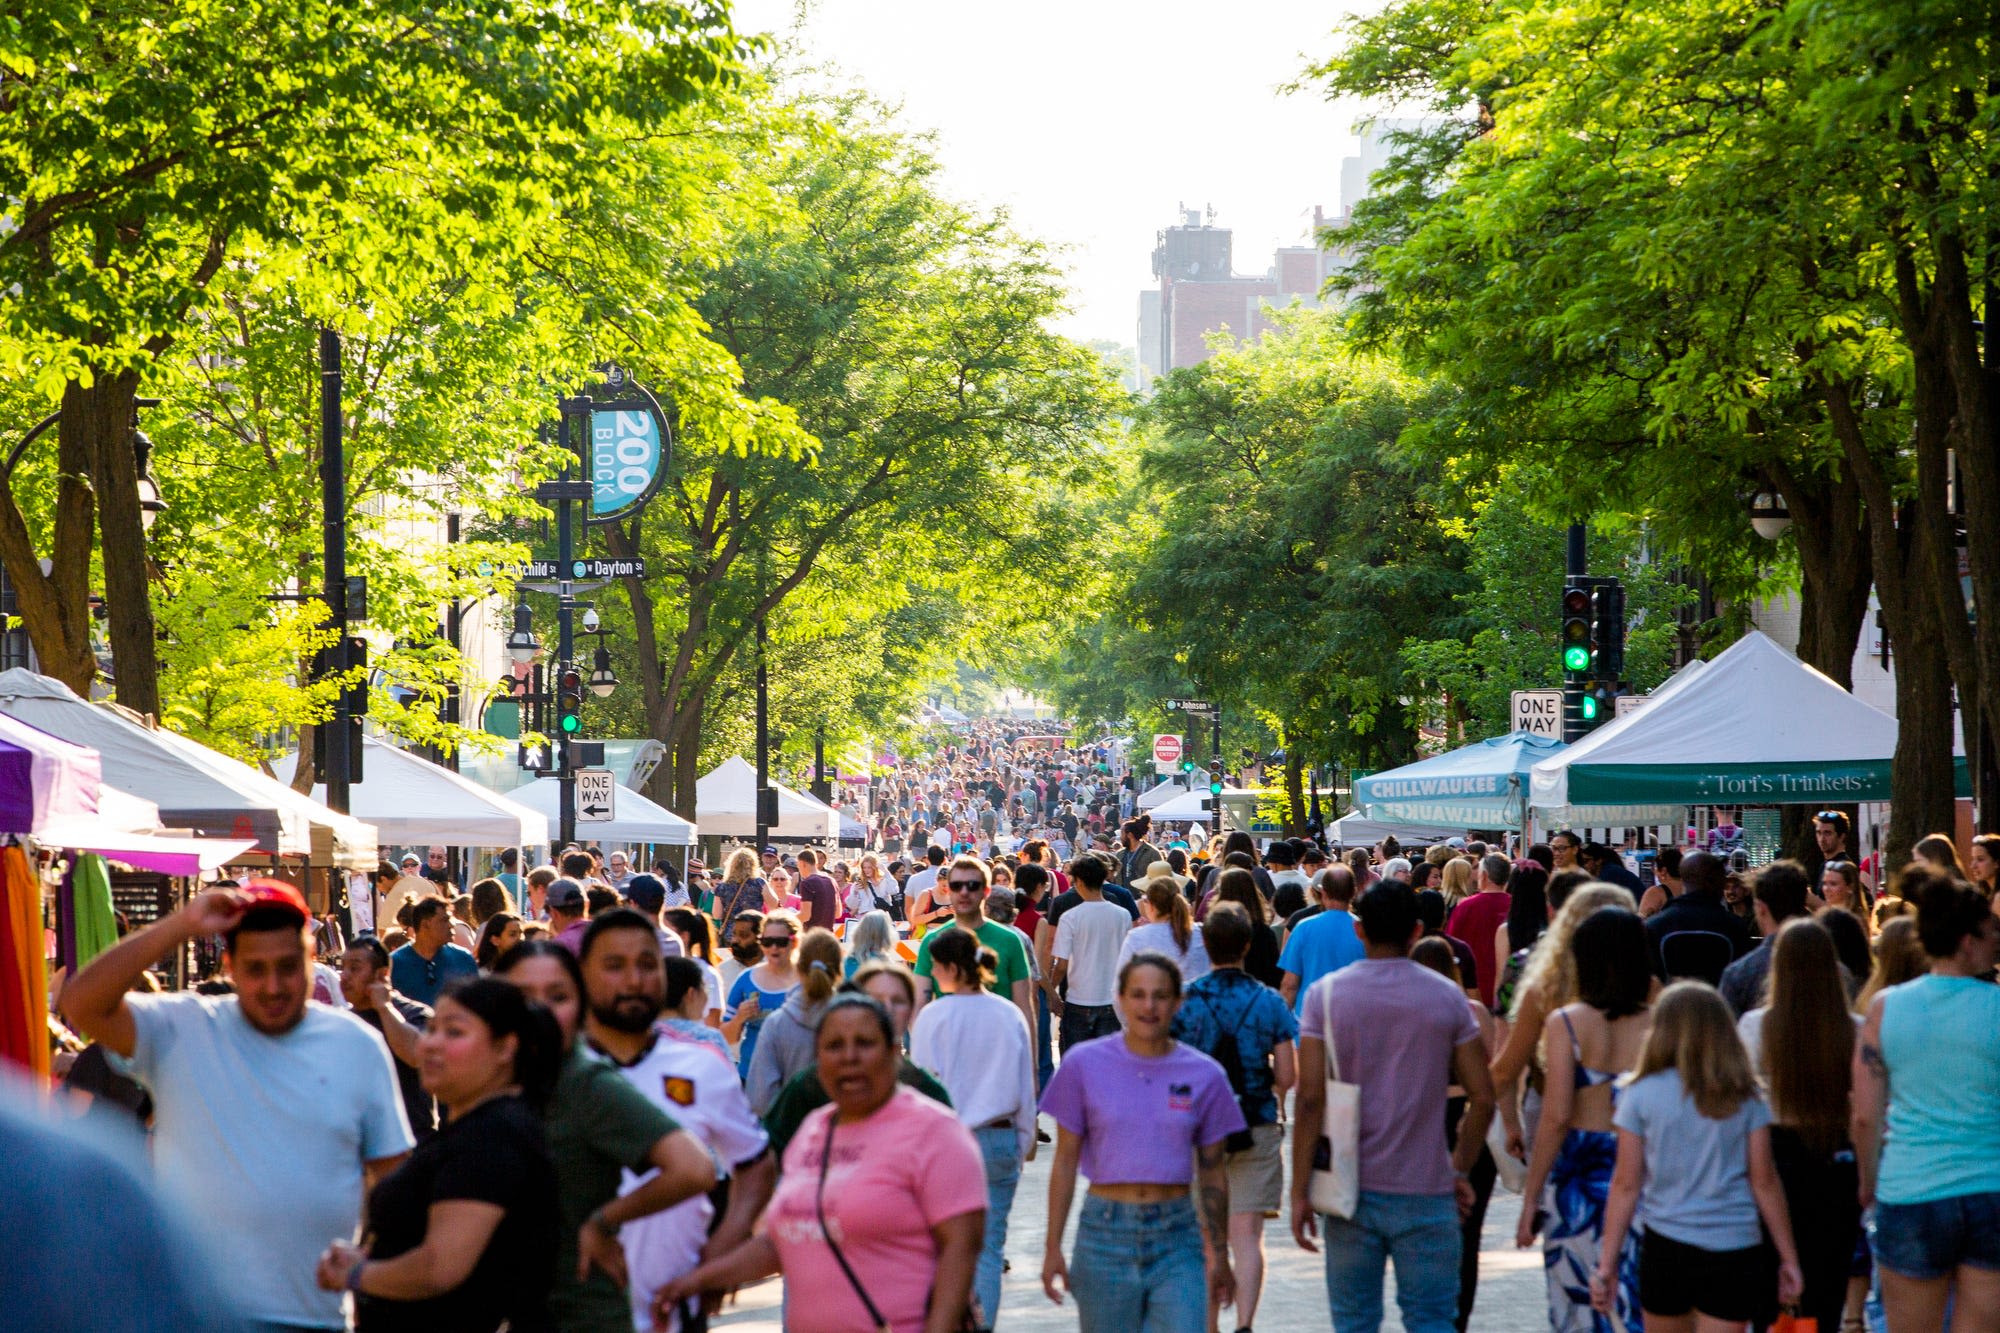 Downtown Madison Night Market returns for the season Thursday with over 110 vendors